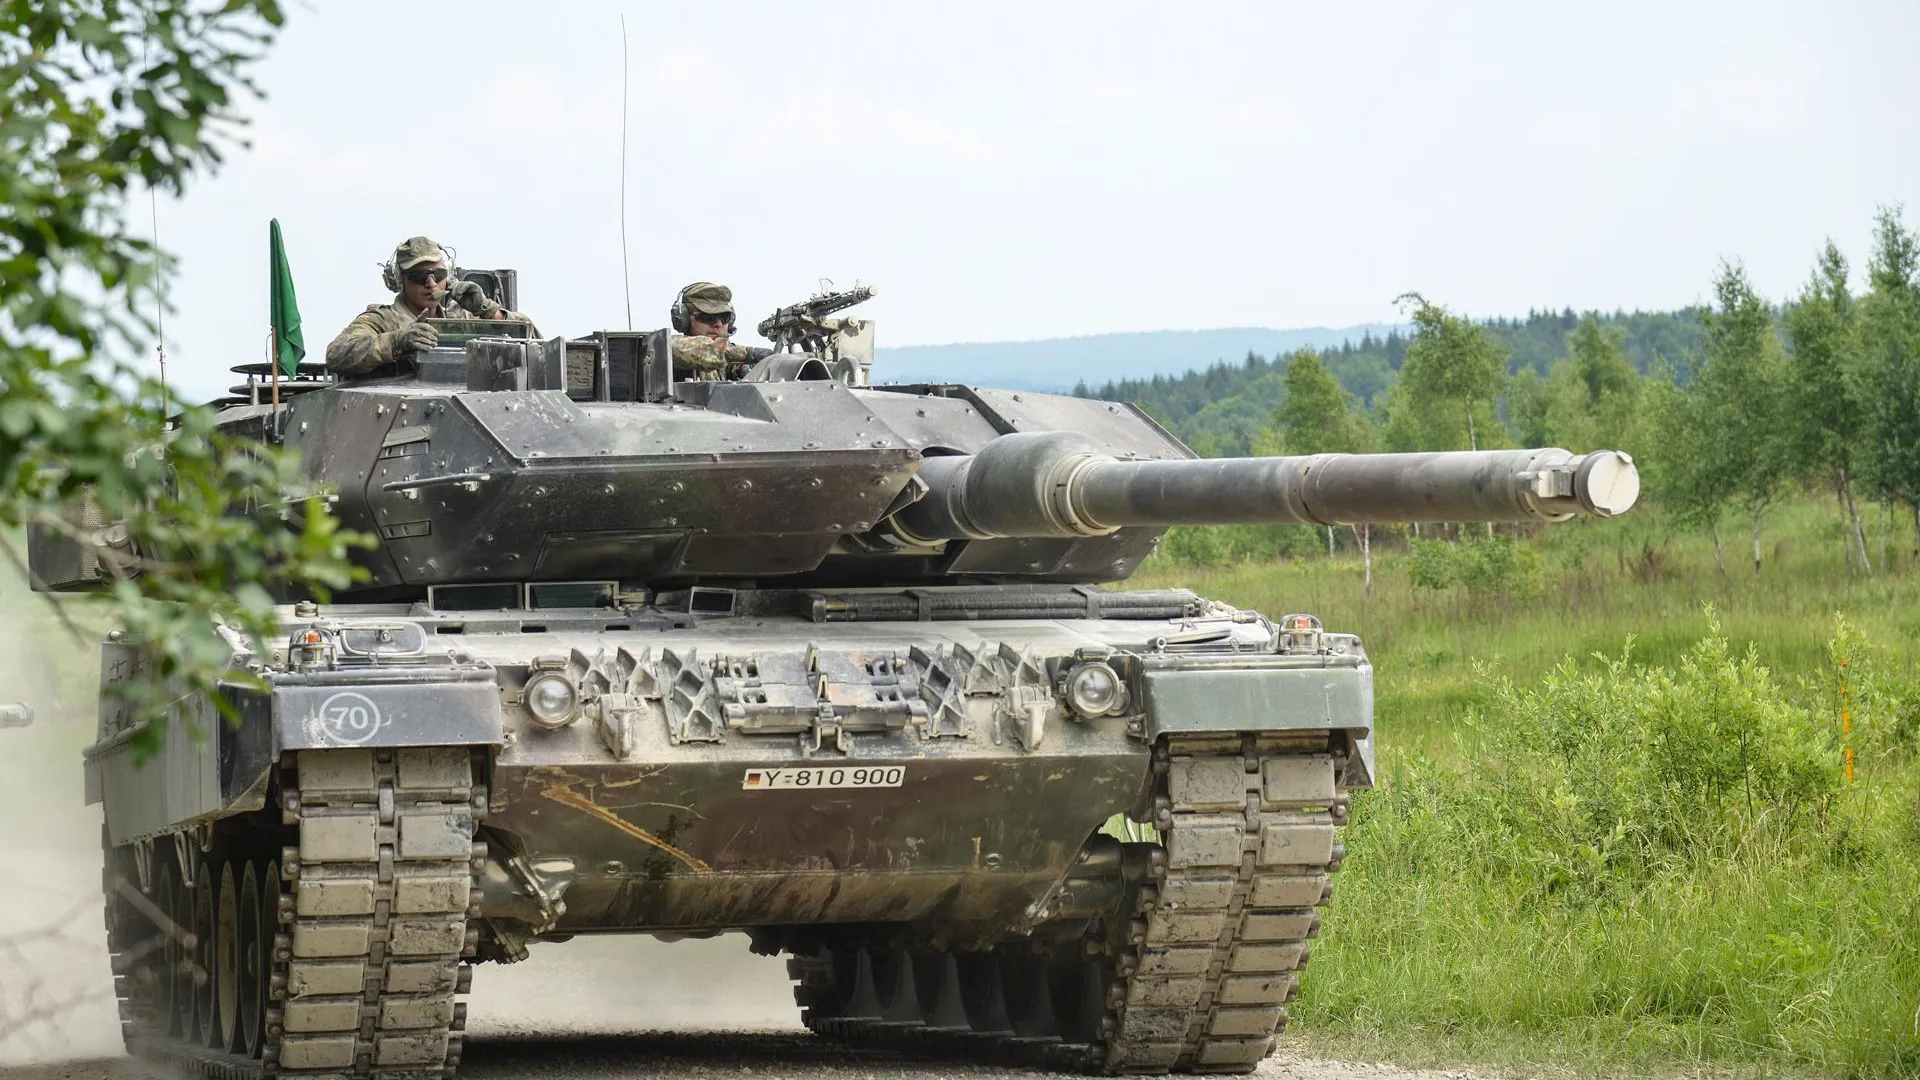 7th Army Training Command from Grafenwoehr, Germany. Strong Europe Tank Challenge 2018, CC BY 2.0